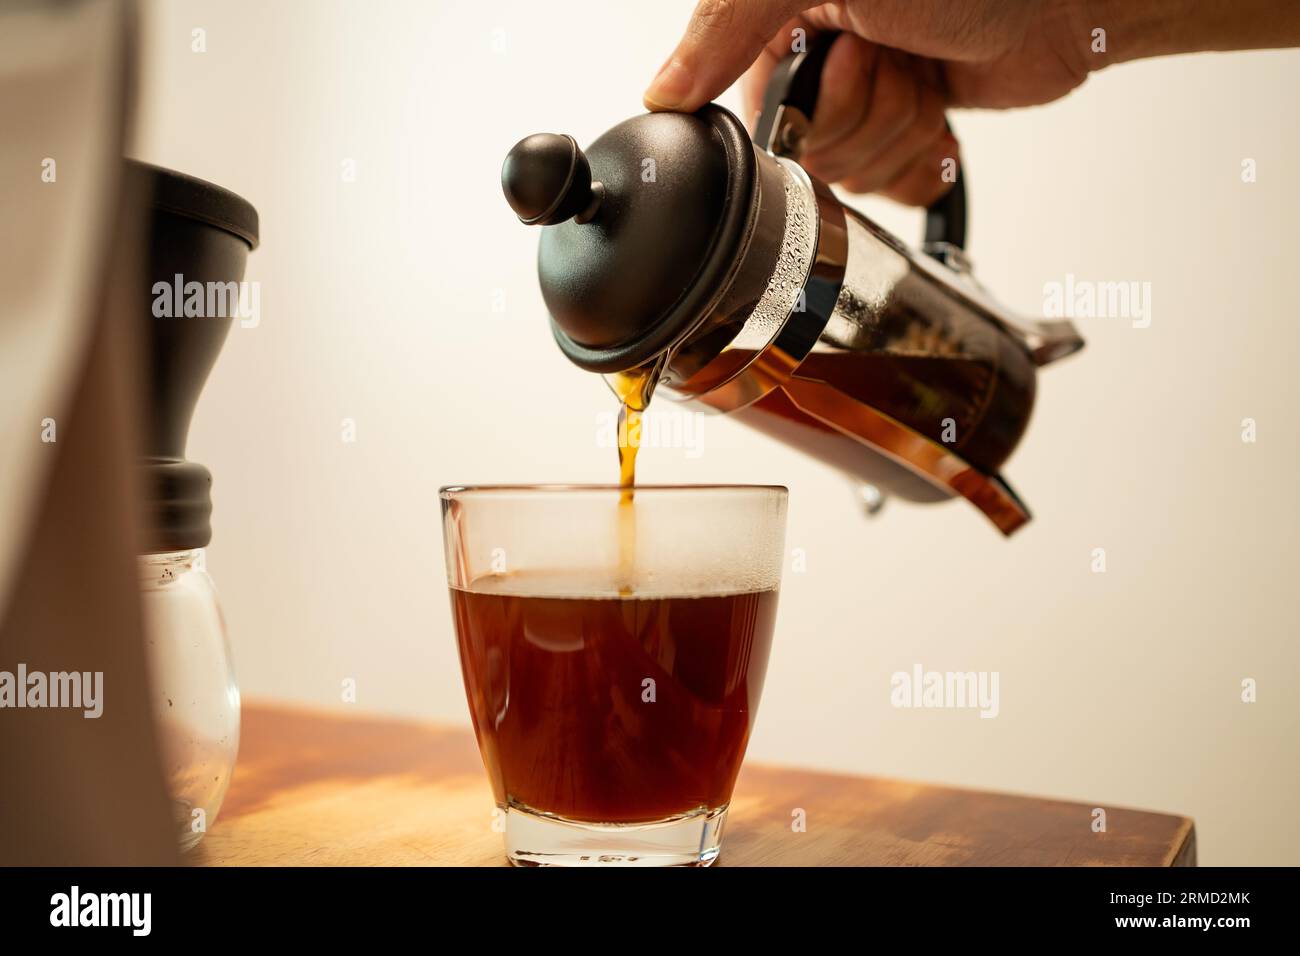 Pouring hot coffee from a french press jug into a drinking glass Stock Photo